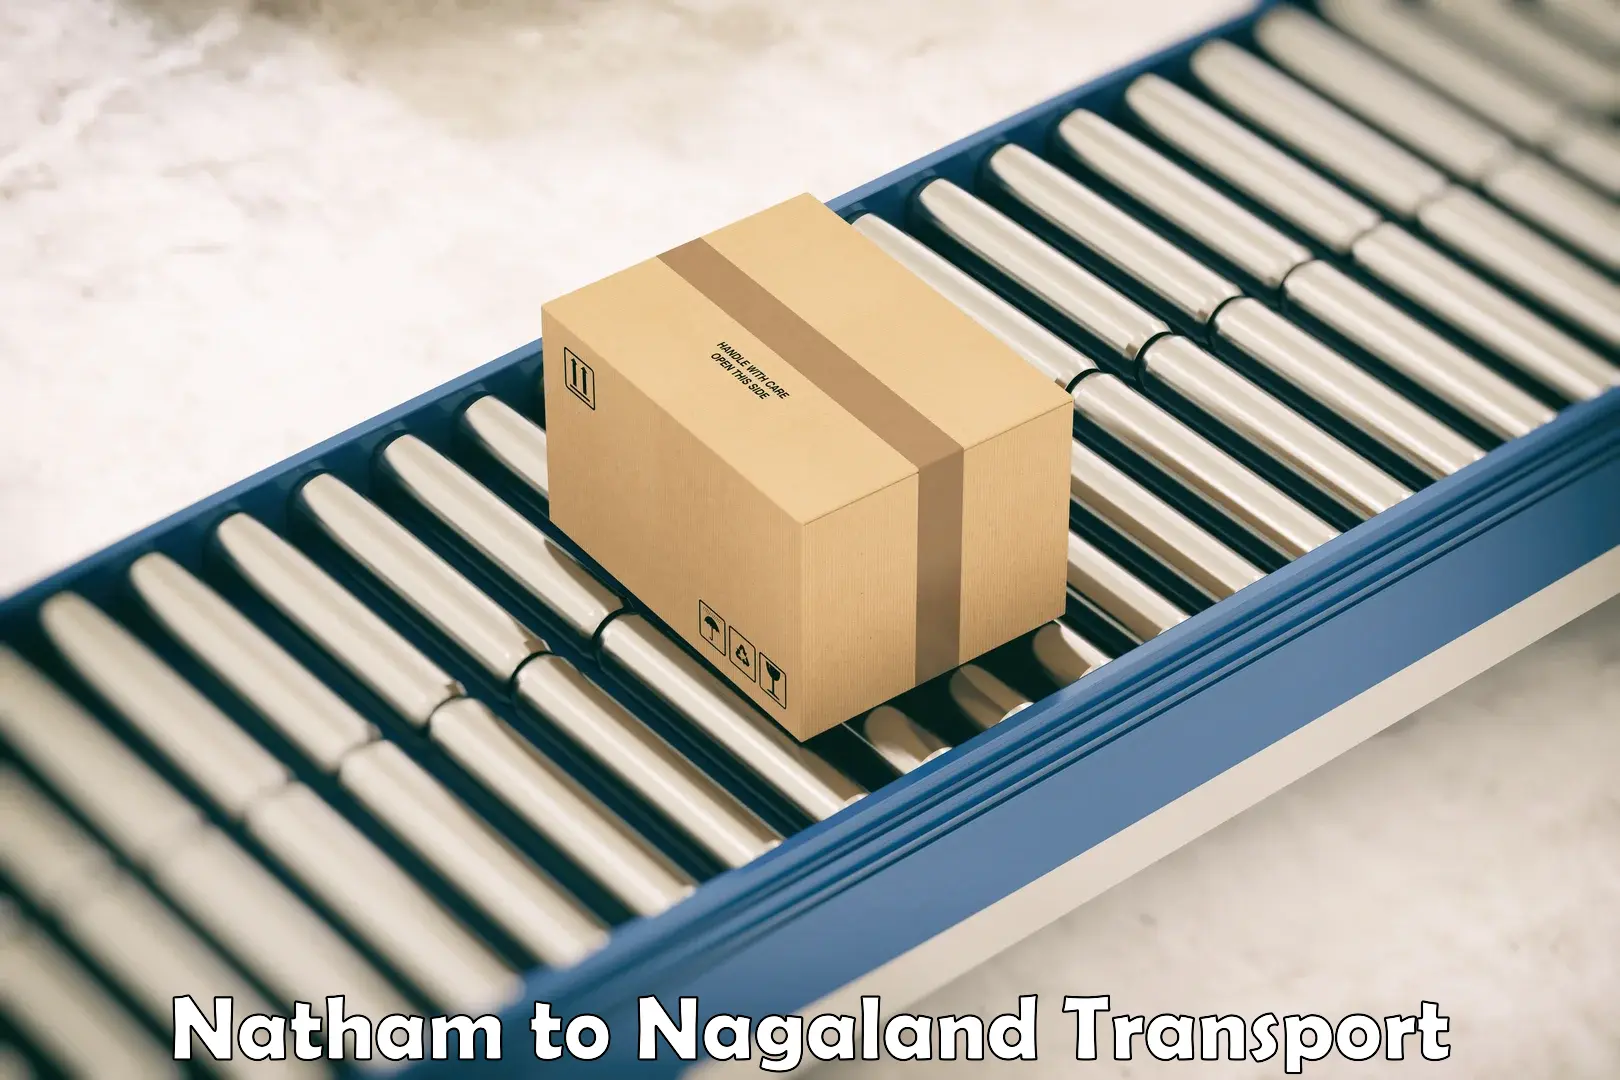 Container transport service Natham to Nagaland